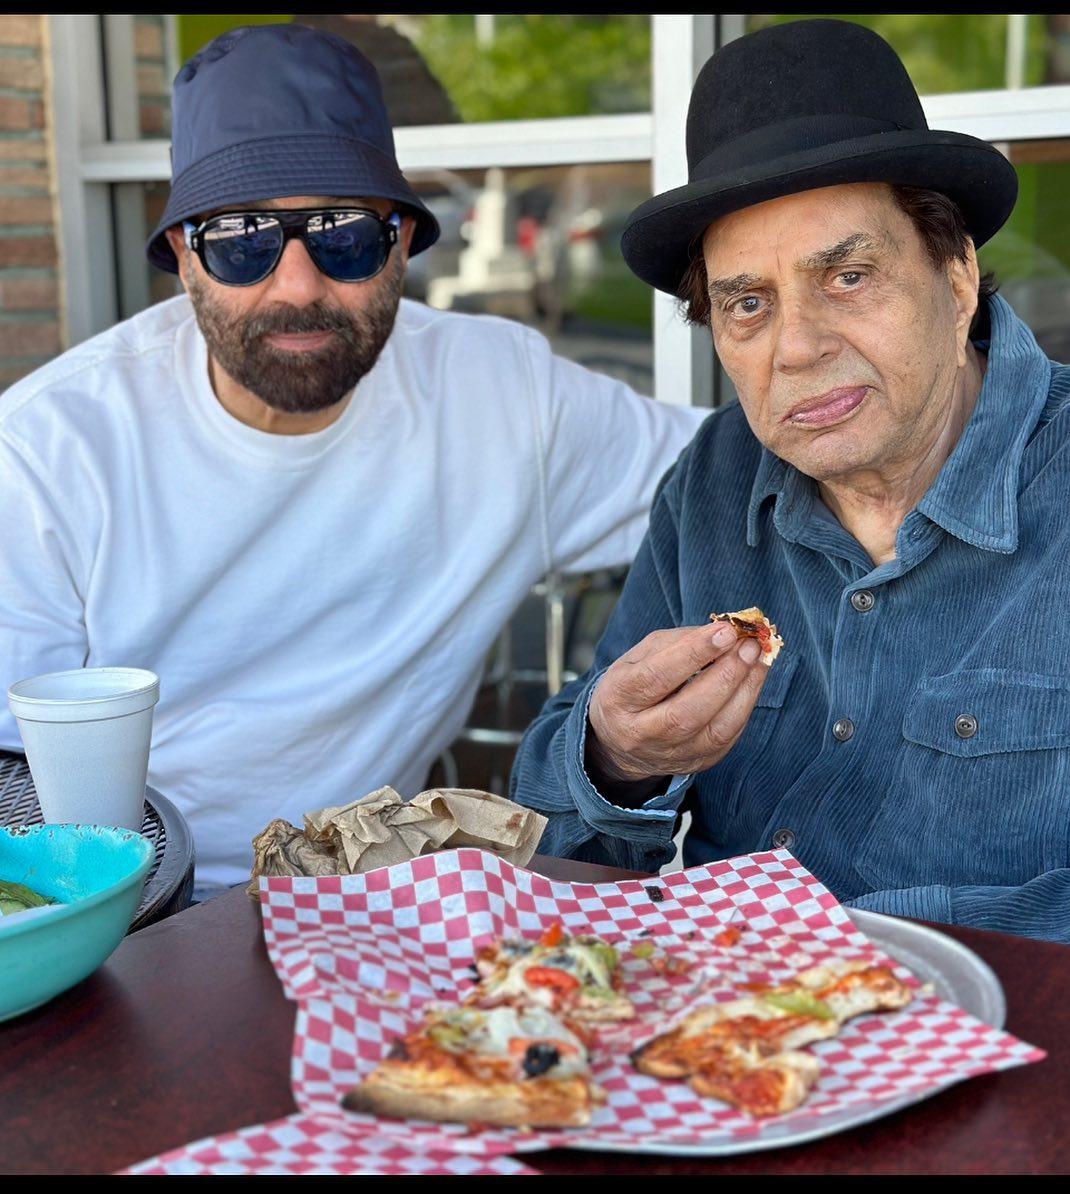 Recently, Sunny Deol posted a picture of himself and his father Dharmendra indulging in a slice of 'Za in a picturesque location